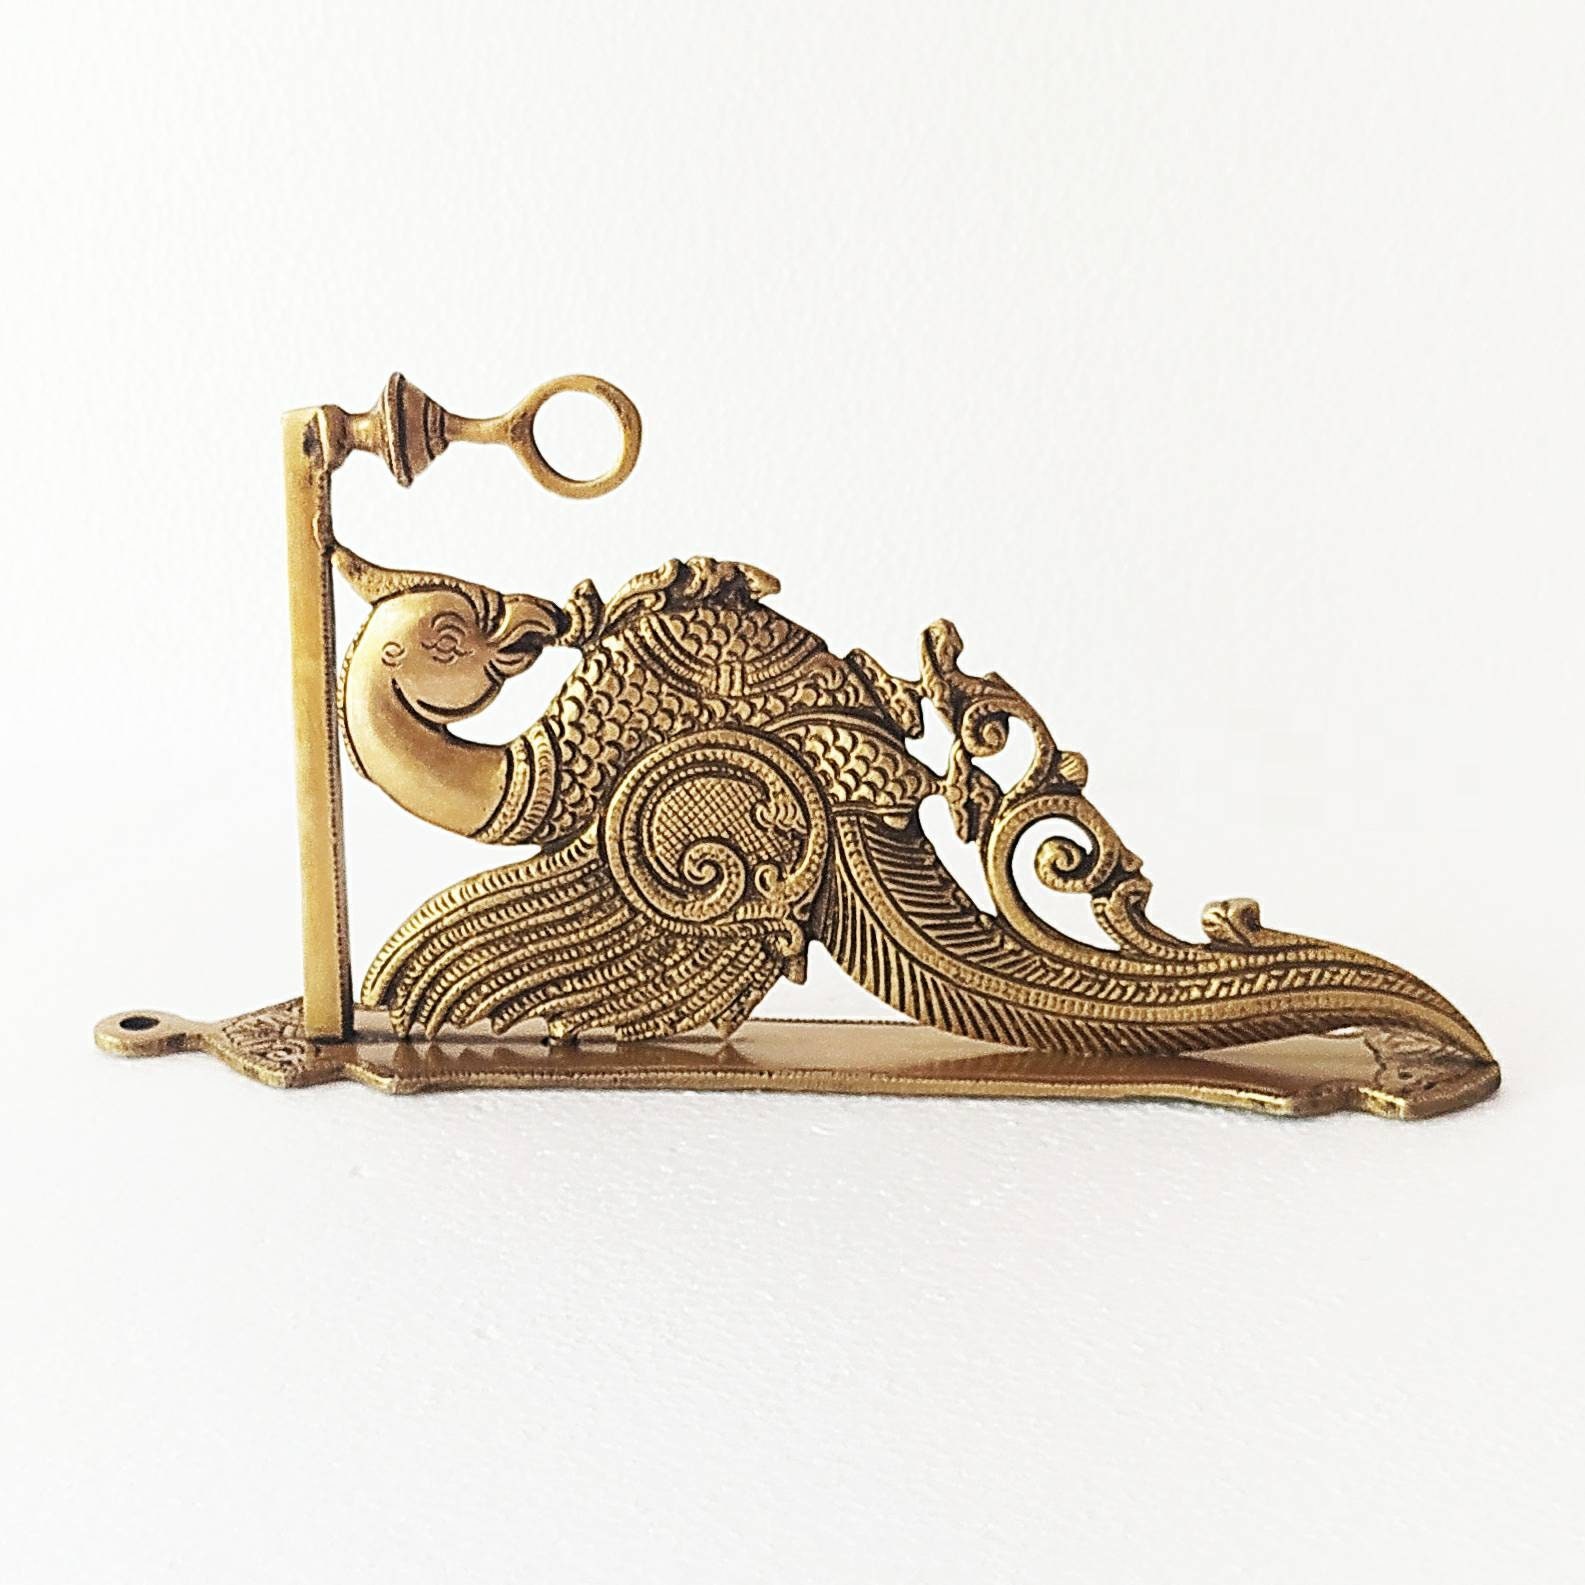 Ornate Handcrafted Parrot Design Brass Wall Hook With Base Plate, Ht 31 Cm  X W 15 Cm, Home Decor, Wall Decor, Parrot Hook, Ethnic Wall Hook -   Canada